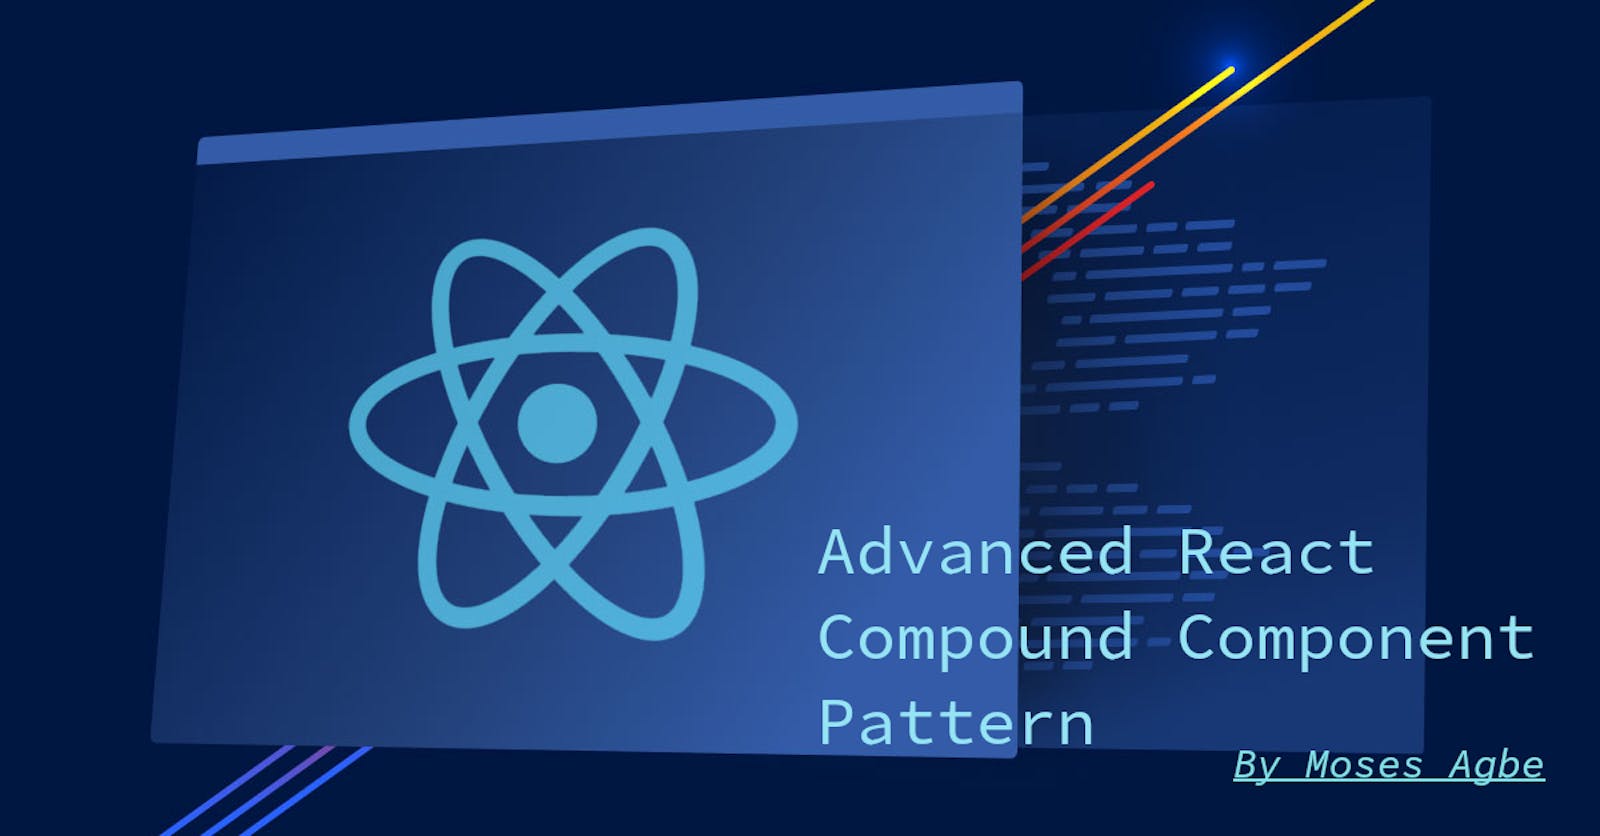 The Advanced React Compound Component Pattern